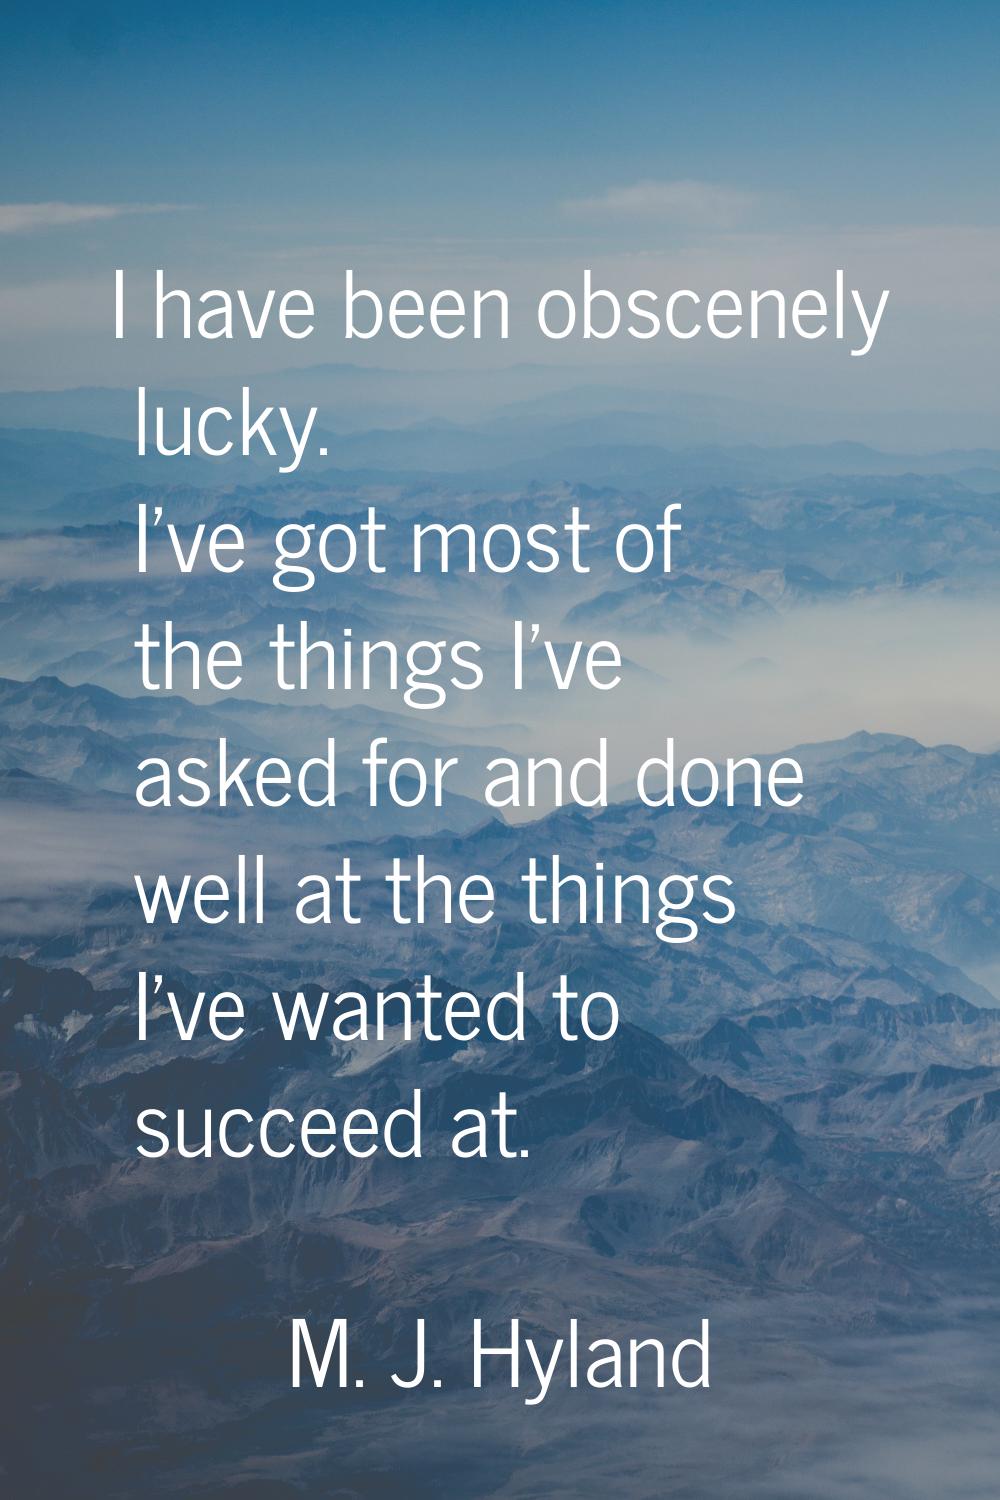 I have been obscenely lucky. I've got most of the things I've asked for and done well at the things